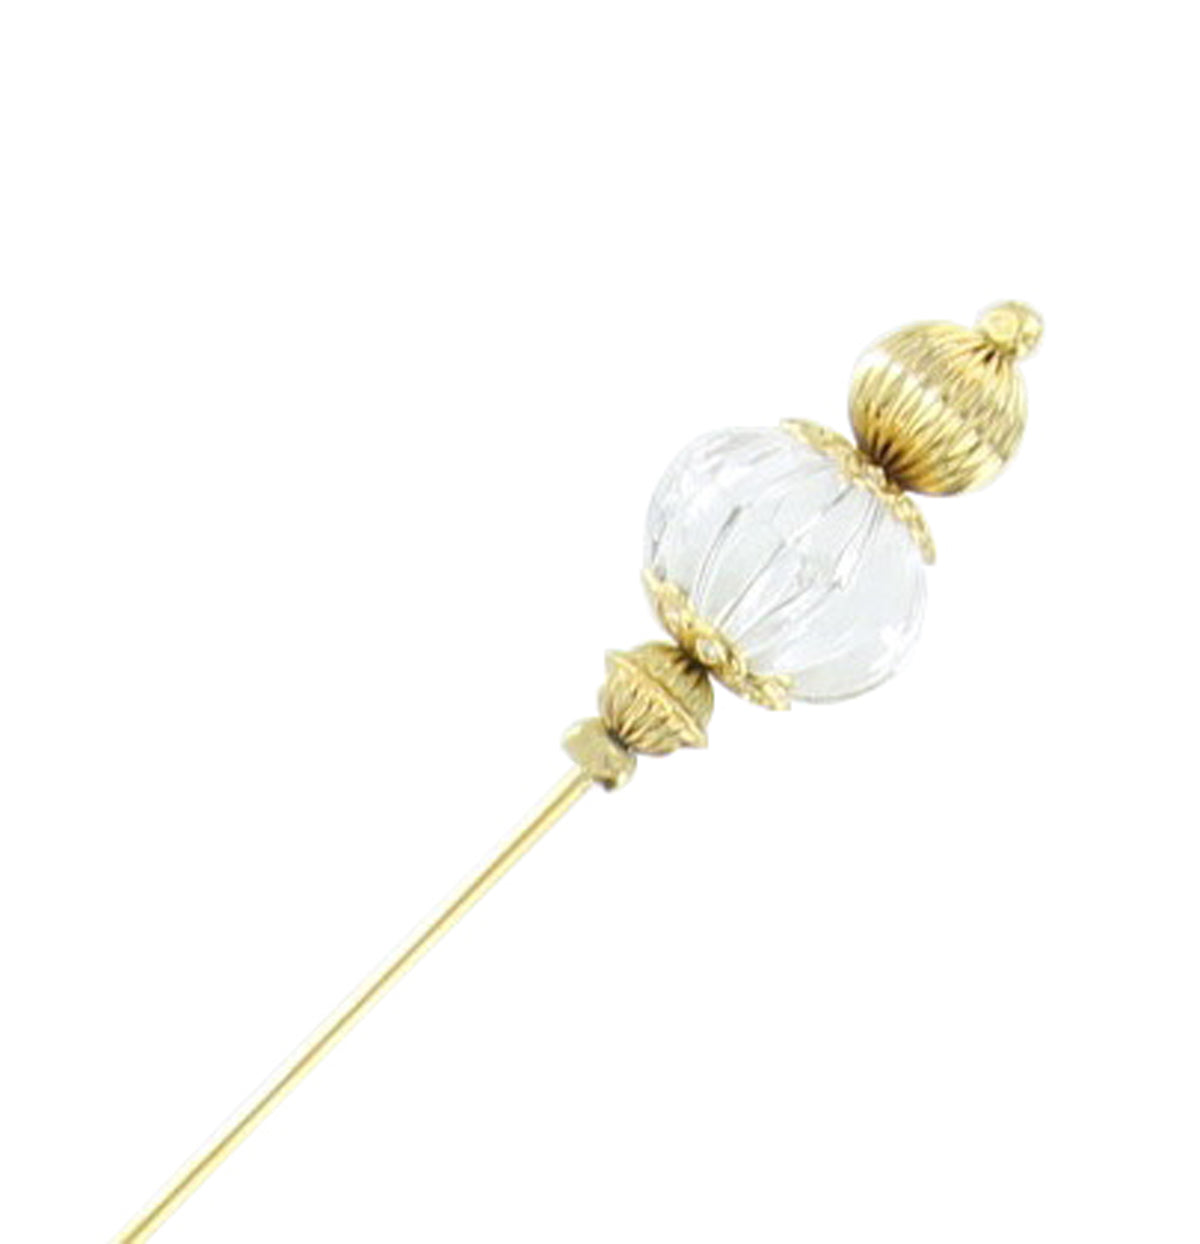 Hat Pin Unisex Stick Suit Brooch Corsage Pin Gold Tone Clear Wedding 4 3/8"